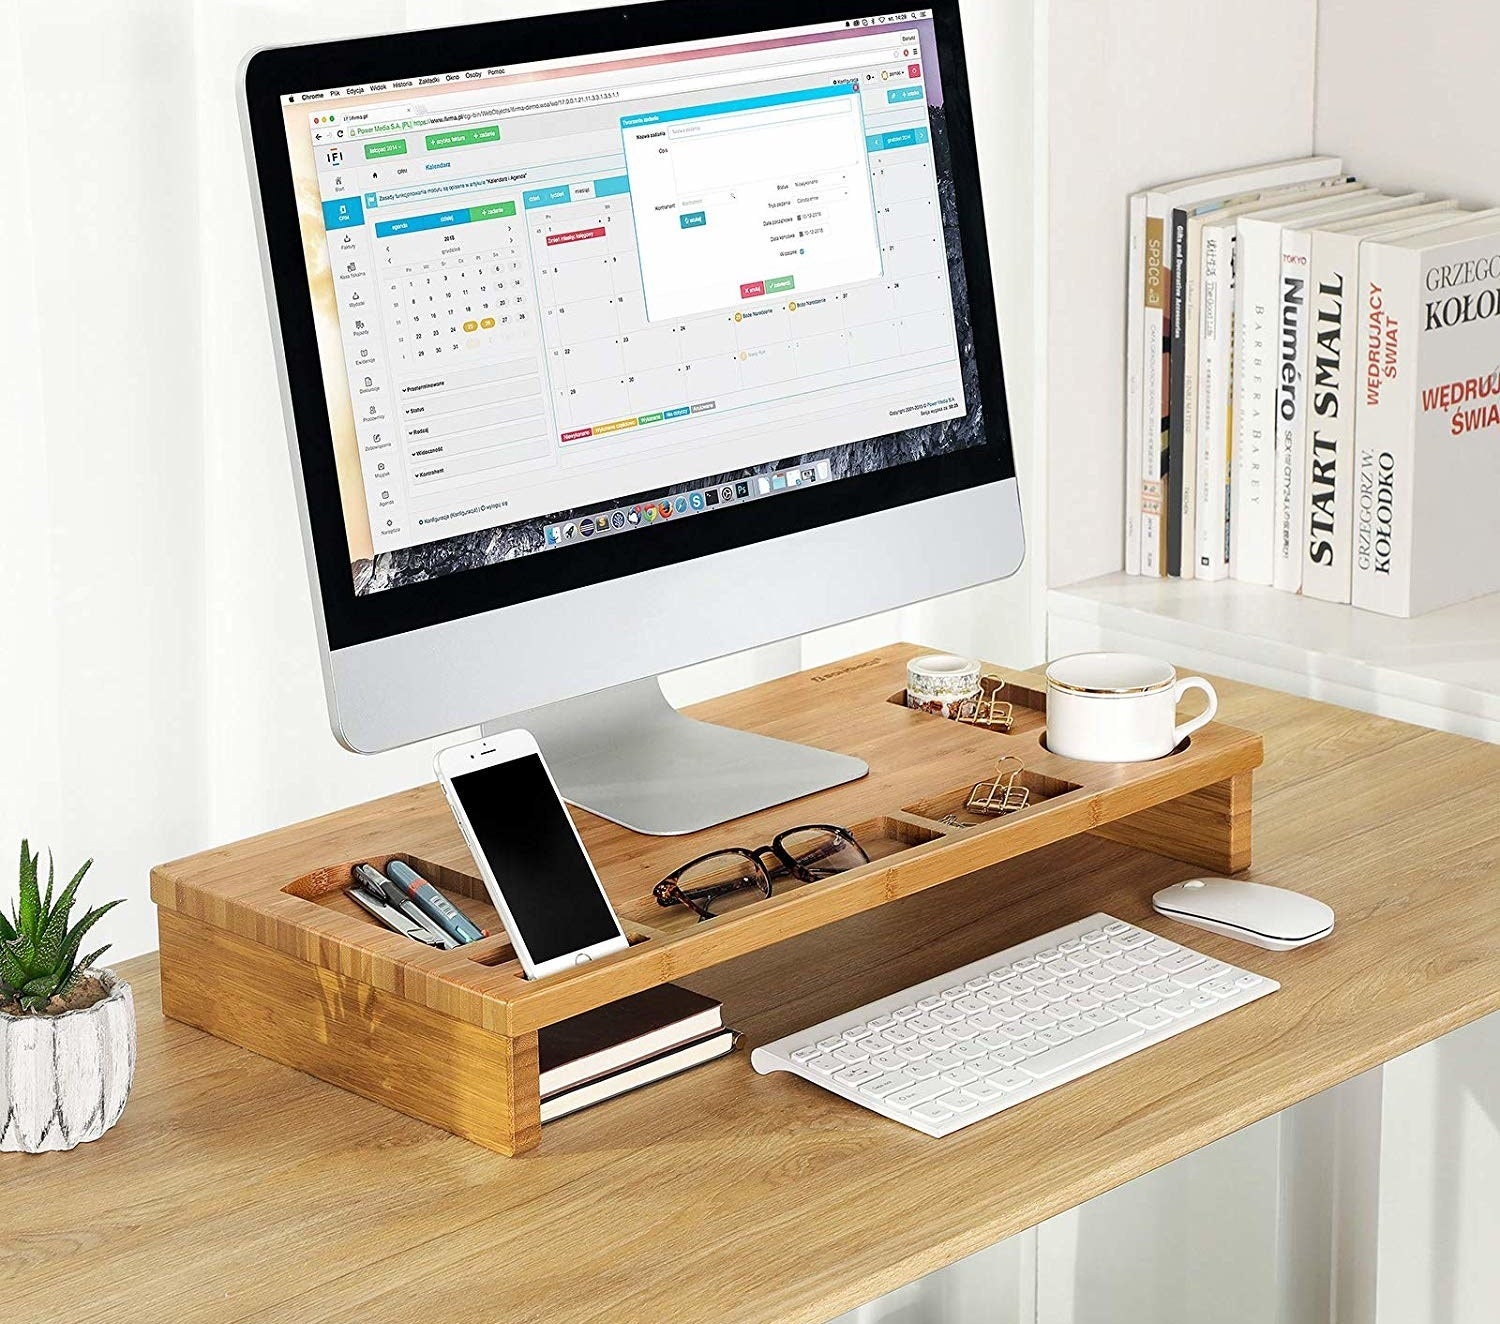 18 Products That'll Make Your Desk A Lot More Comfortable